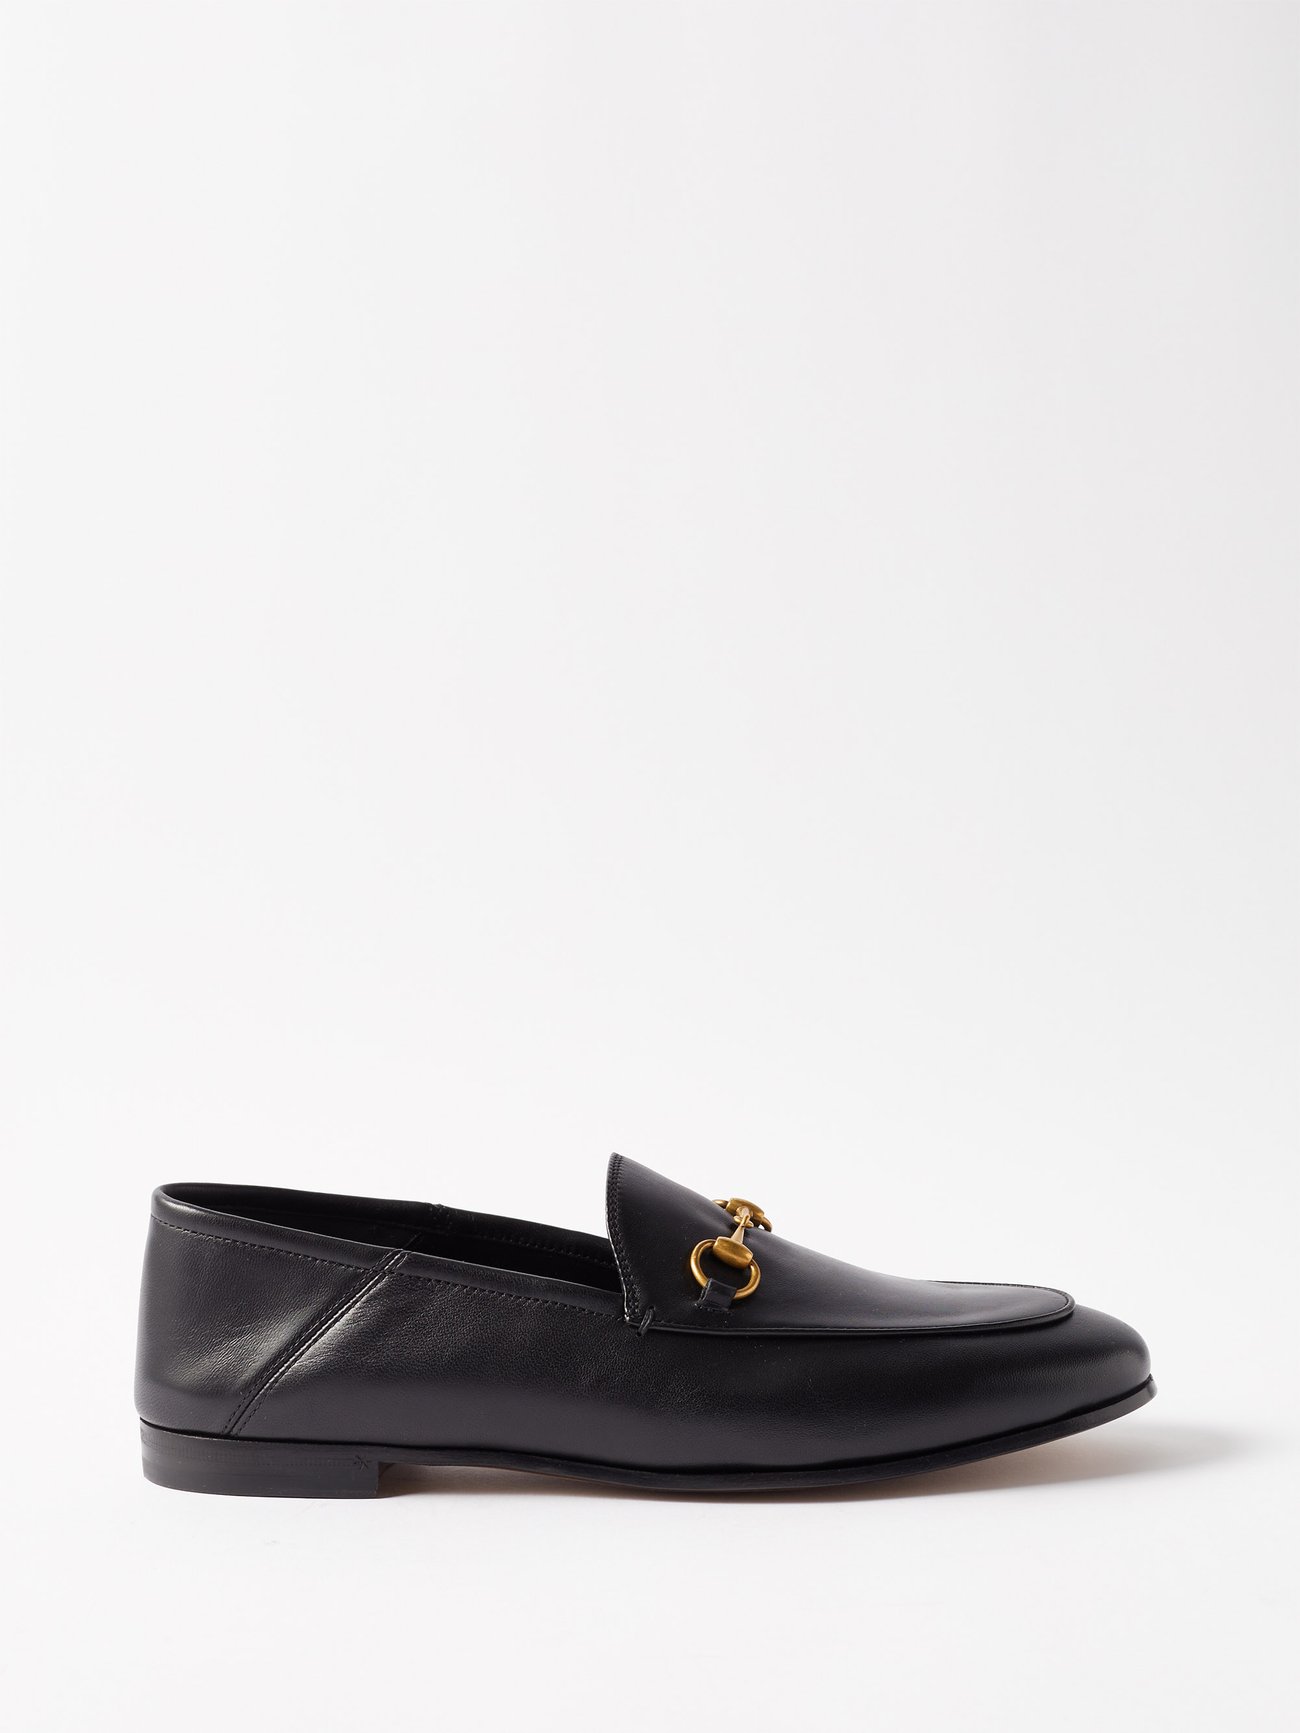 Black Brixton collapsible-heel leather loafers | Gucci | MATCHES UK